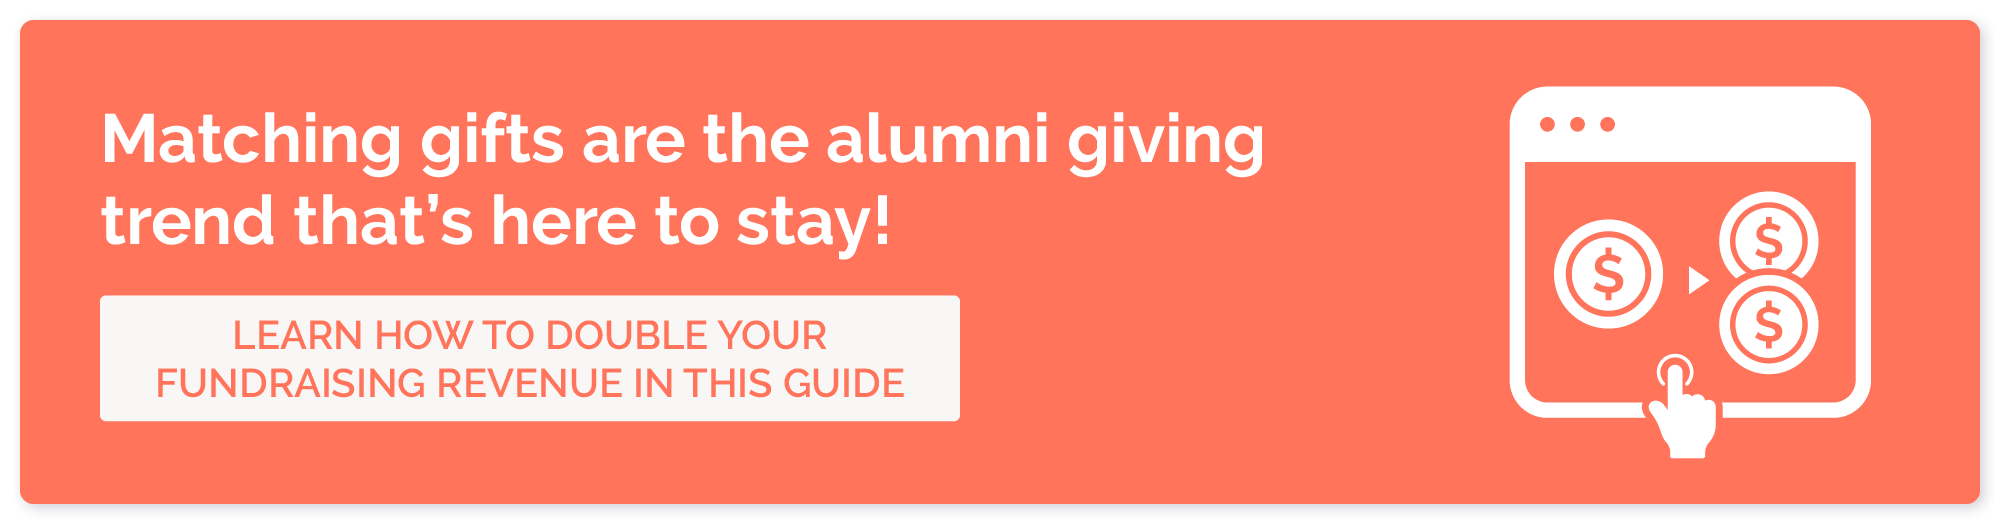 Learn more about our favorite alumni giving trend with this guide to matching gifts.